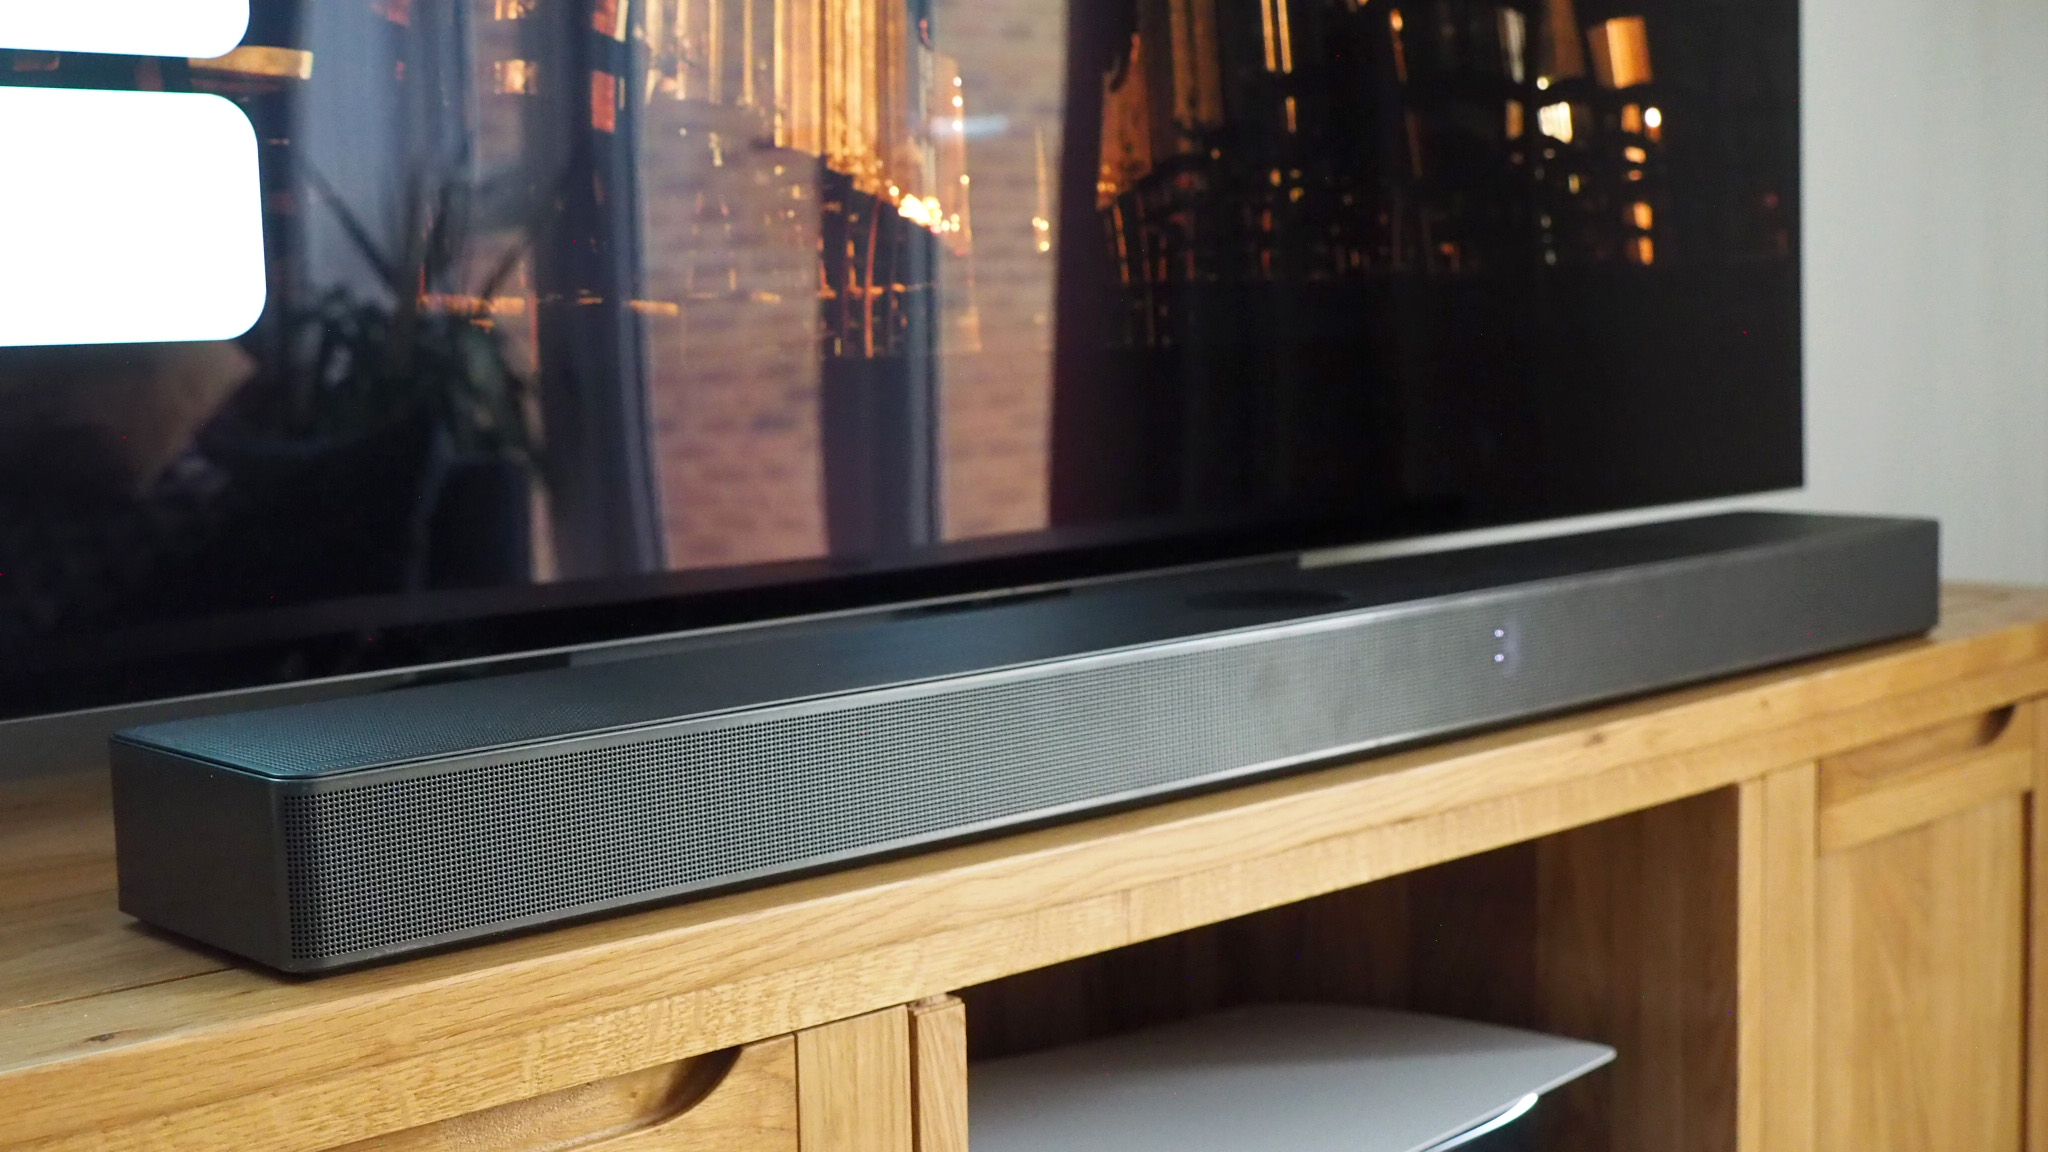 I tested the LG C3 OLED TV's new Dolby Atmos soundbar upgrade feature and…  wow?